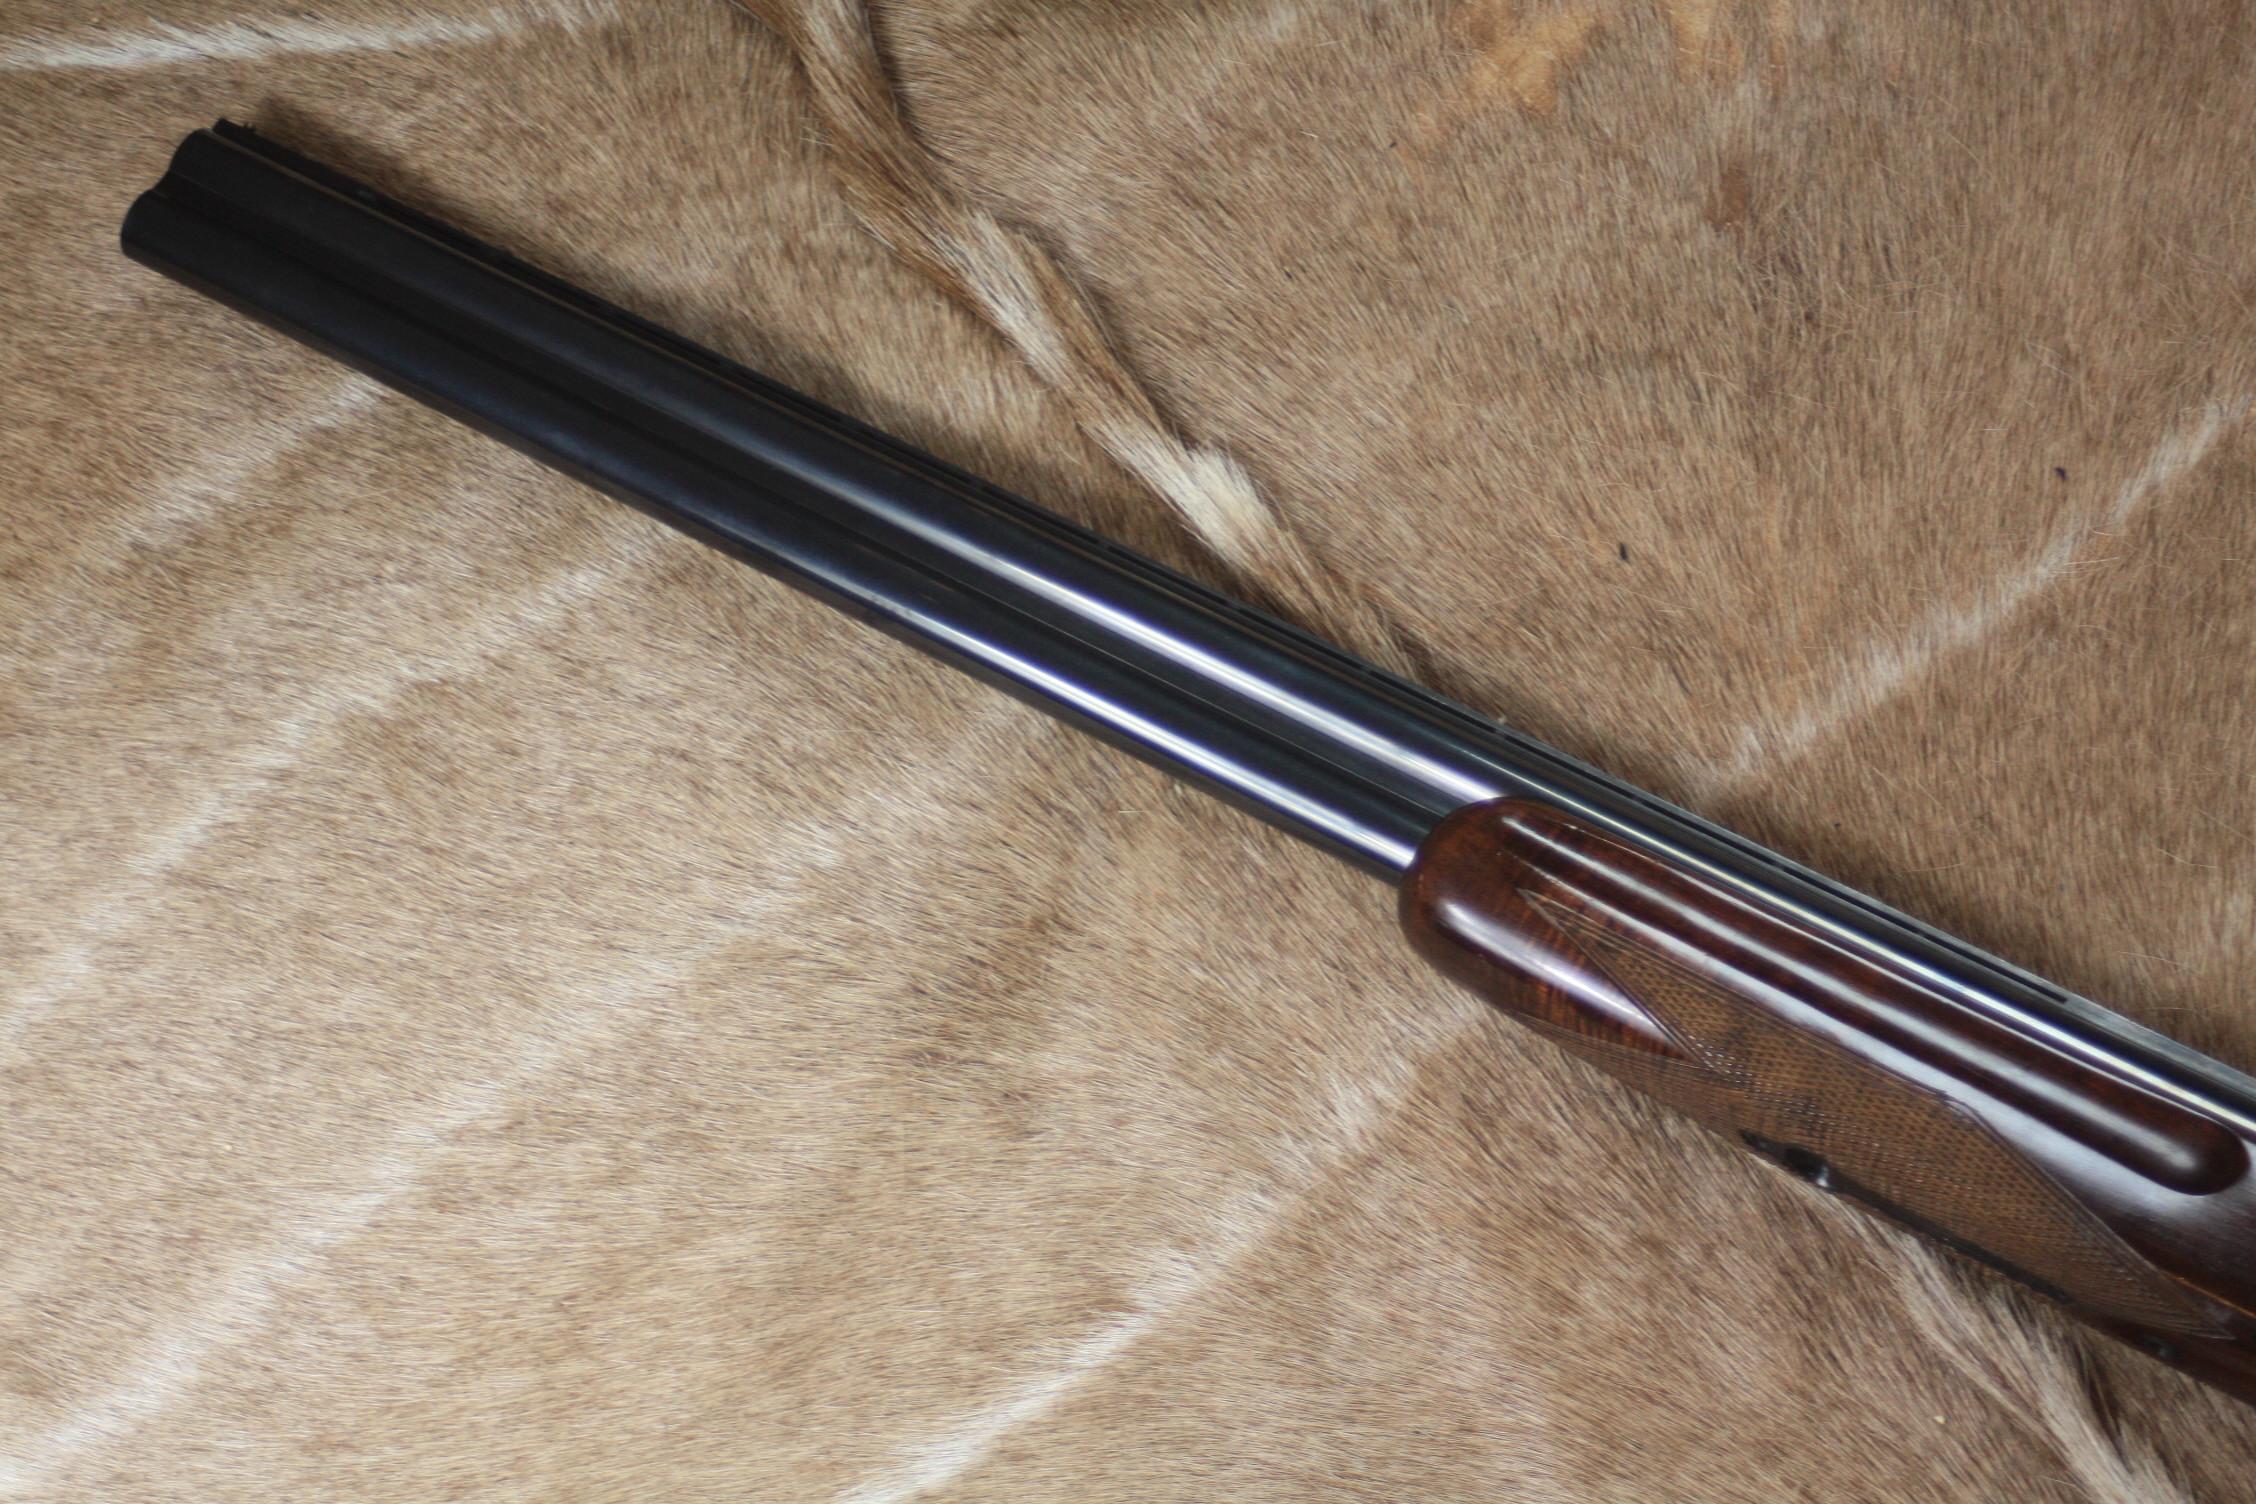 AYA 12-BORE 'YEOMAN' SINGLE-TRIGGER OVER AND UNDER EJECTOR